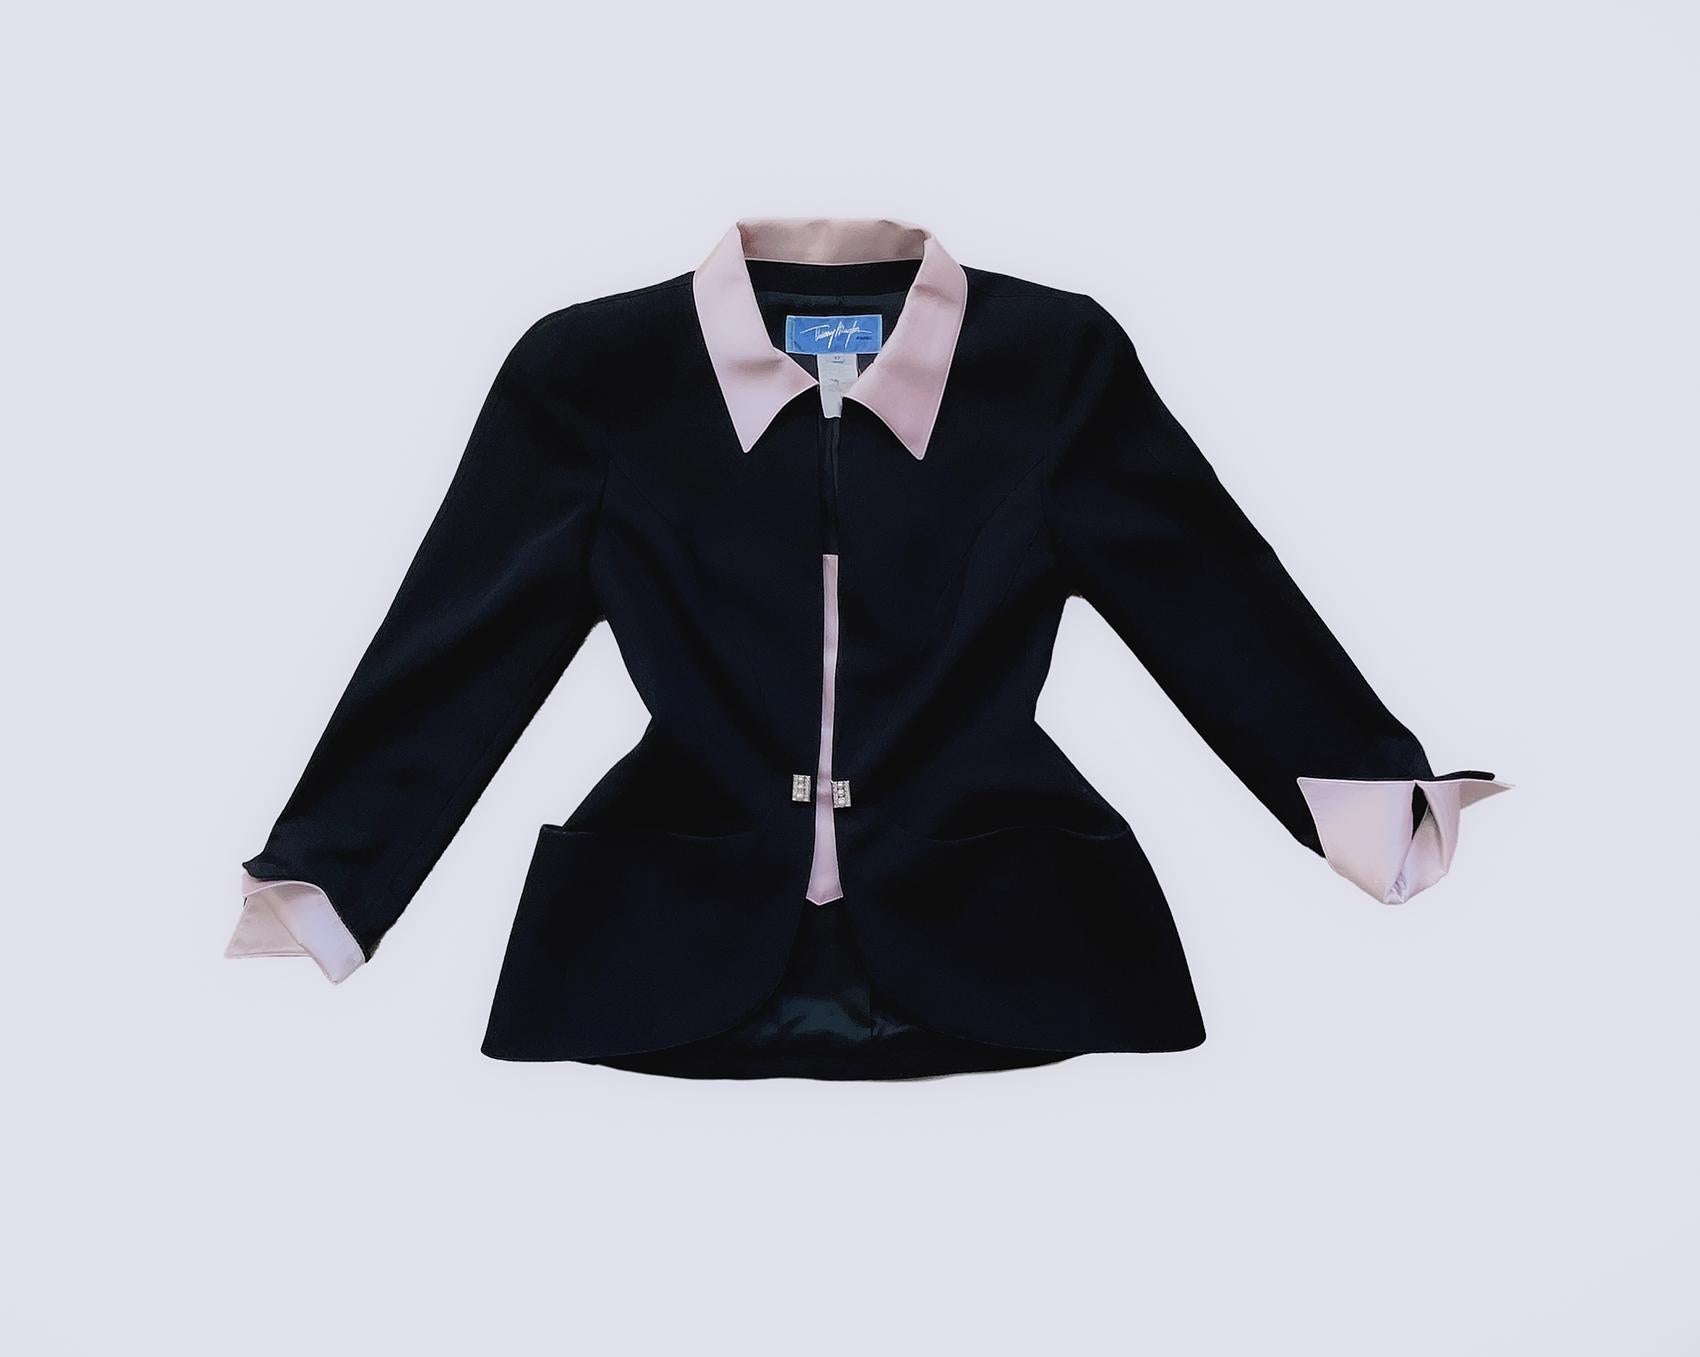 Thierry Mugler Gorgeous Jacket Black Drama Collar Jewel Pearl FW1996 In Excellent Condition For Sale In Berlin, BE